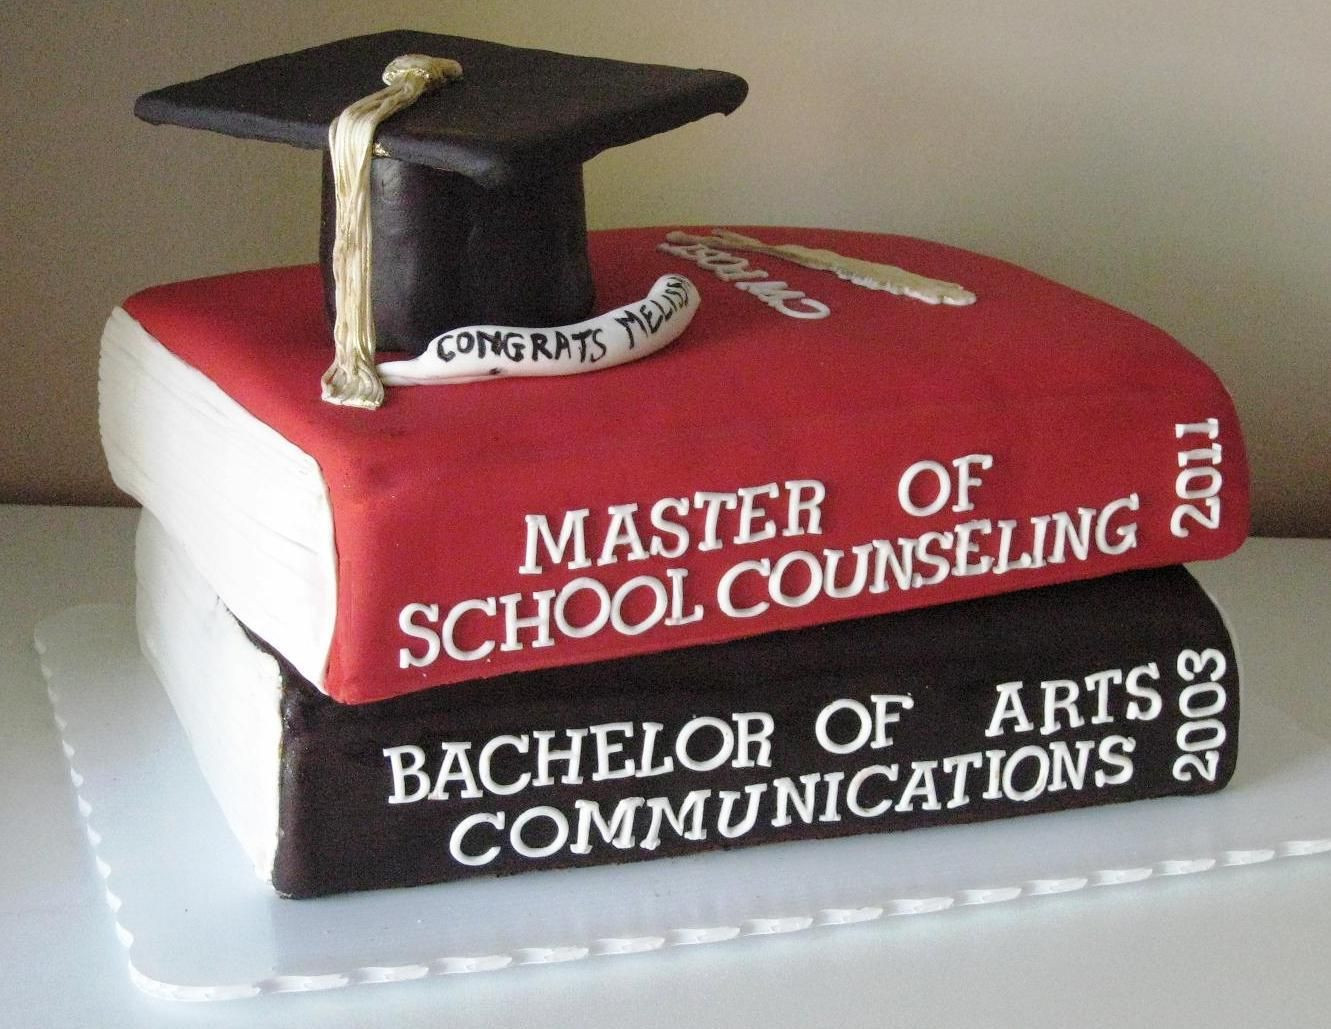 Masters Graduation Party Ideas
 Can someone make me one of these when I graduate